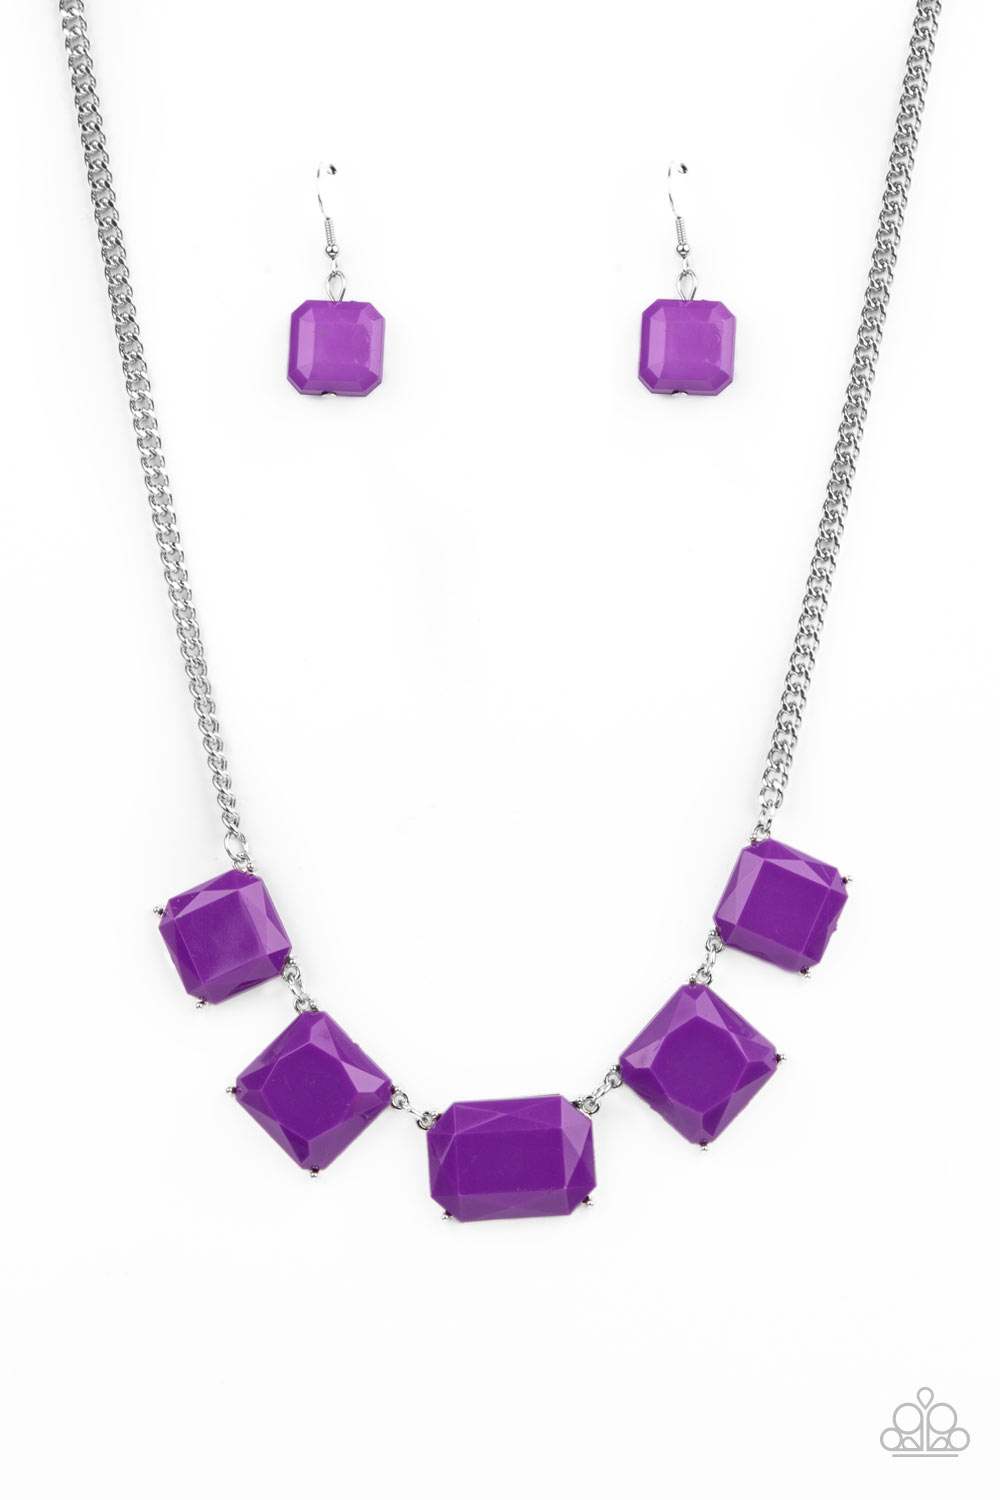 Instant Mood Booster - Purple necklace 1560